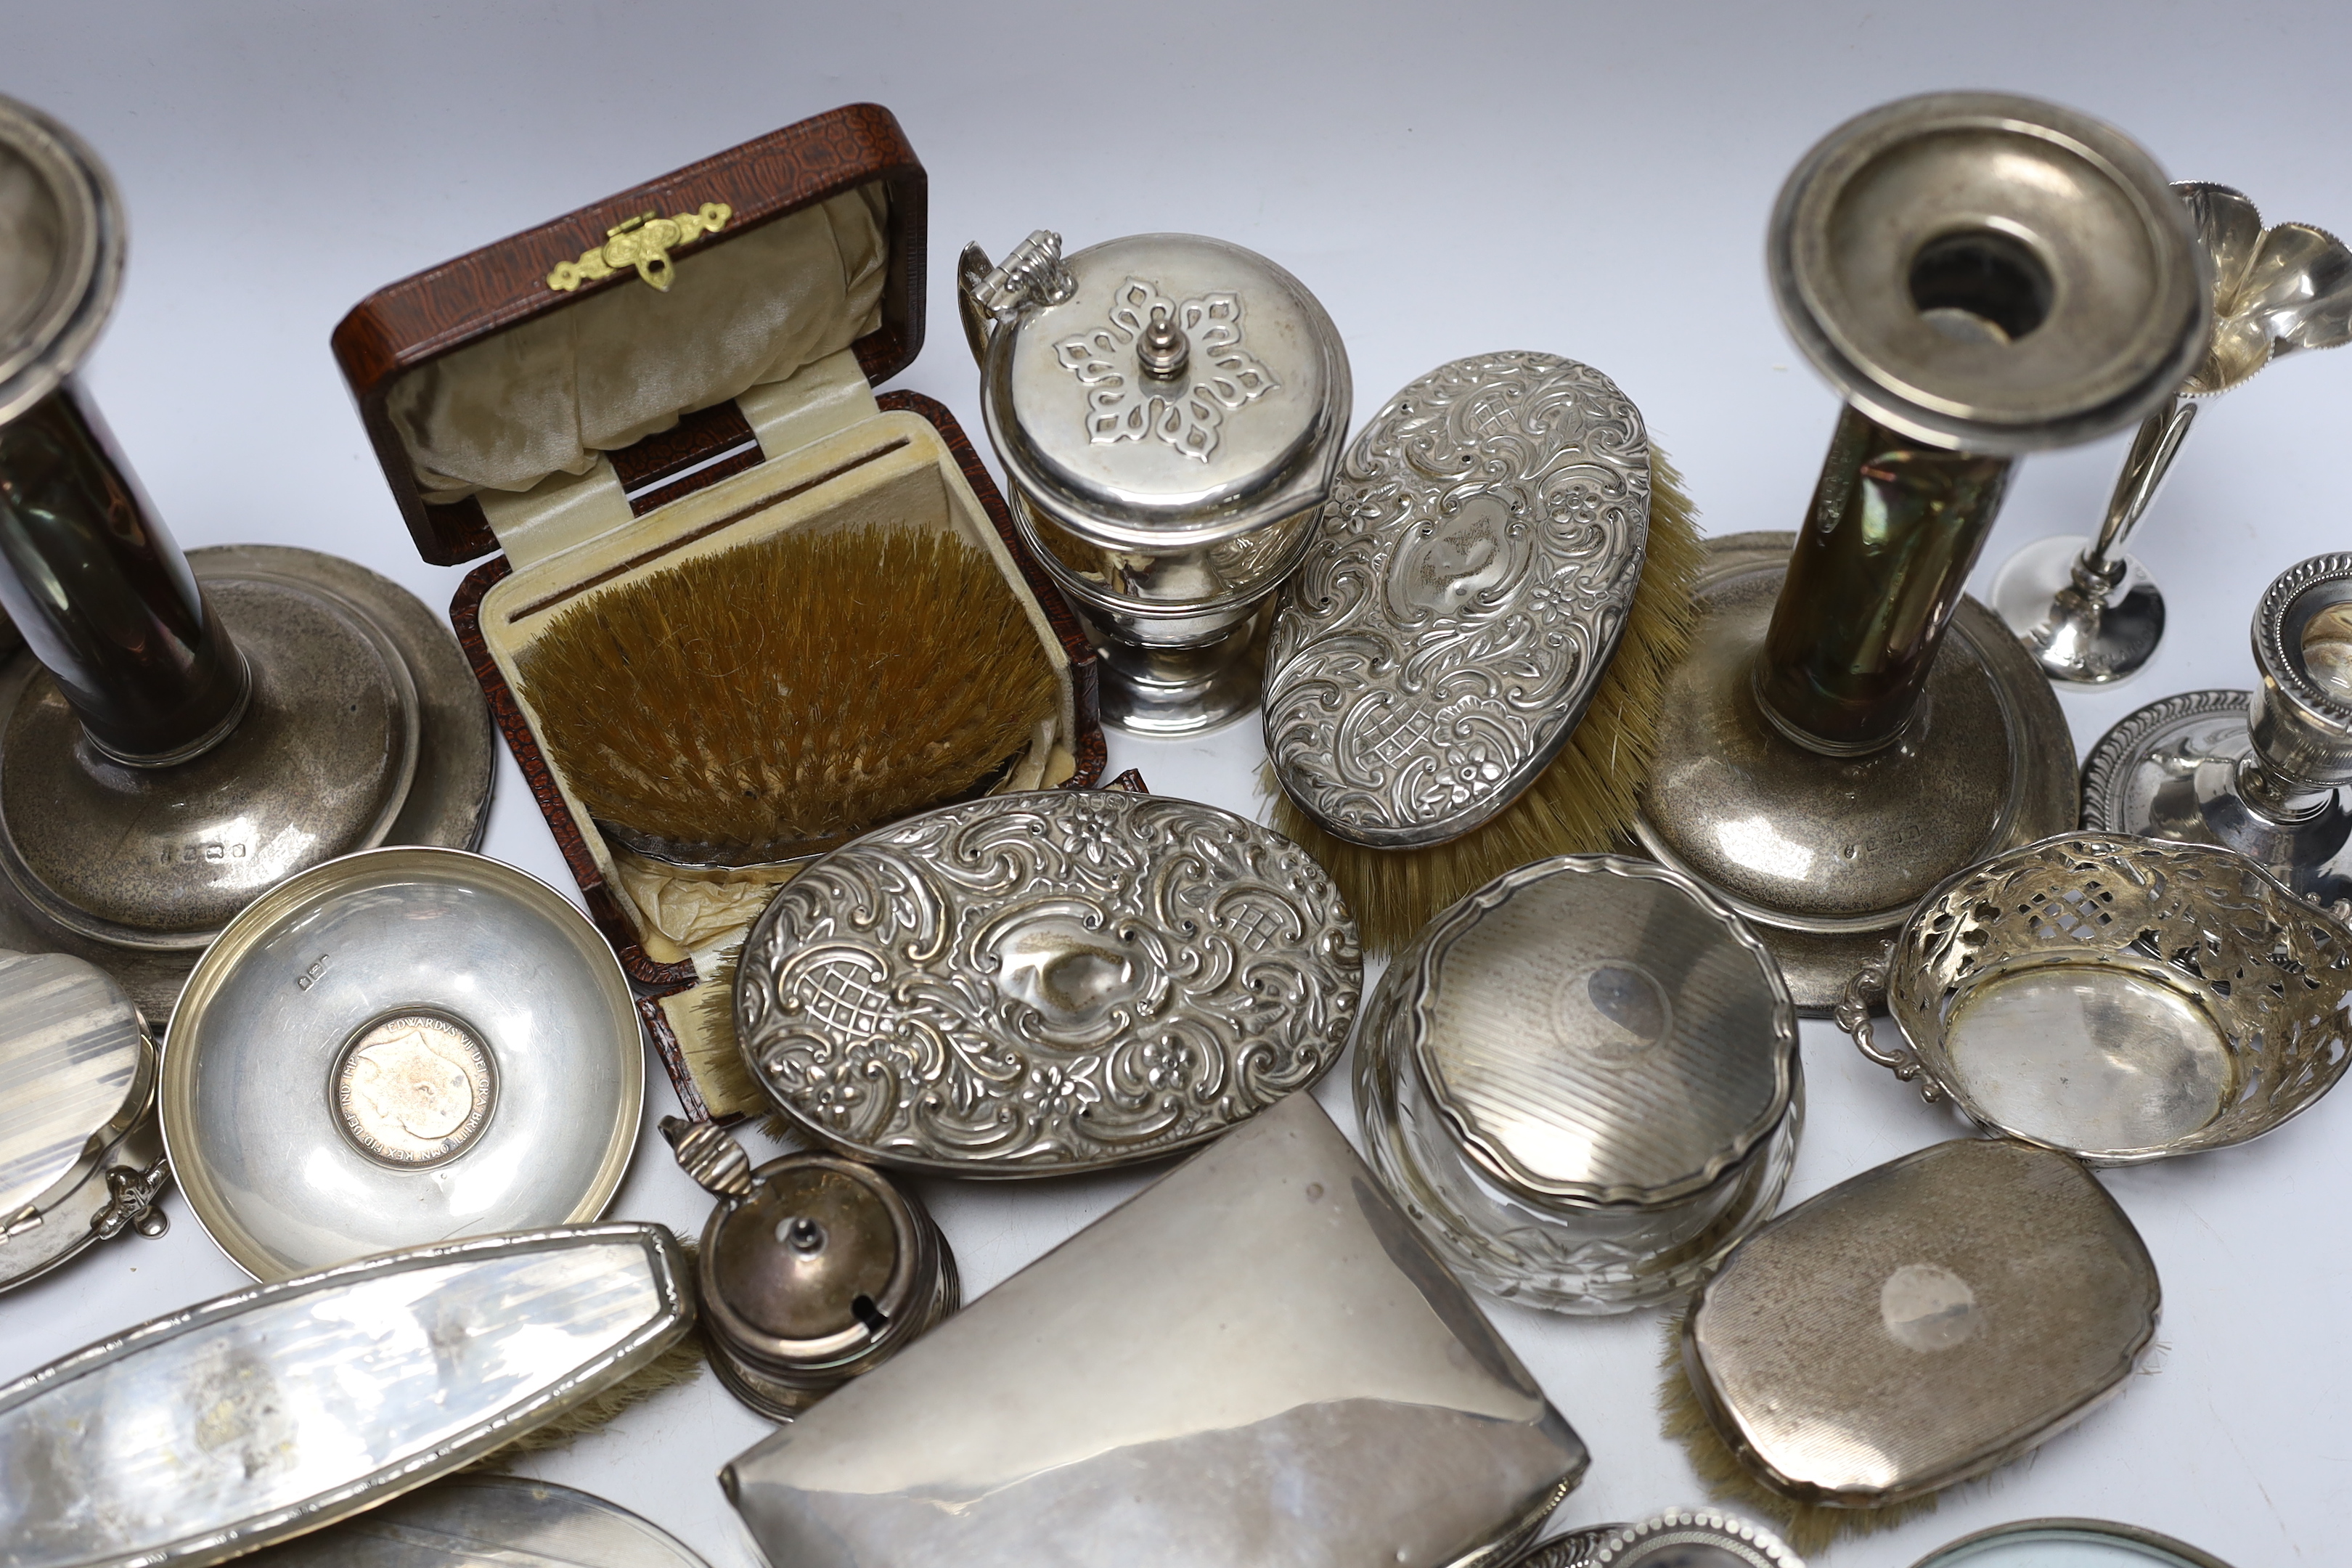 Sundry silver items including a pair of candlesticks, marks rubbed, handled magnifying glass, lidded vase, hand mirror, five brushes, cigarette box, trinket box, toilet jar and eleven other items including a novelty shoe